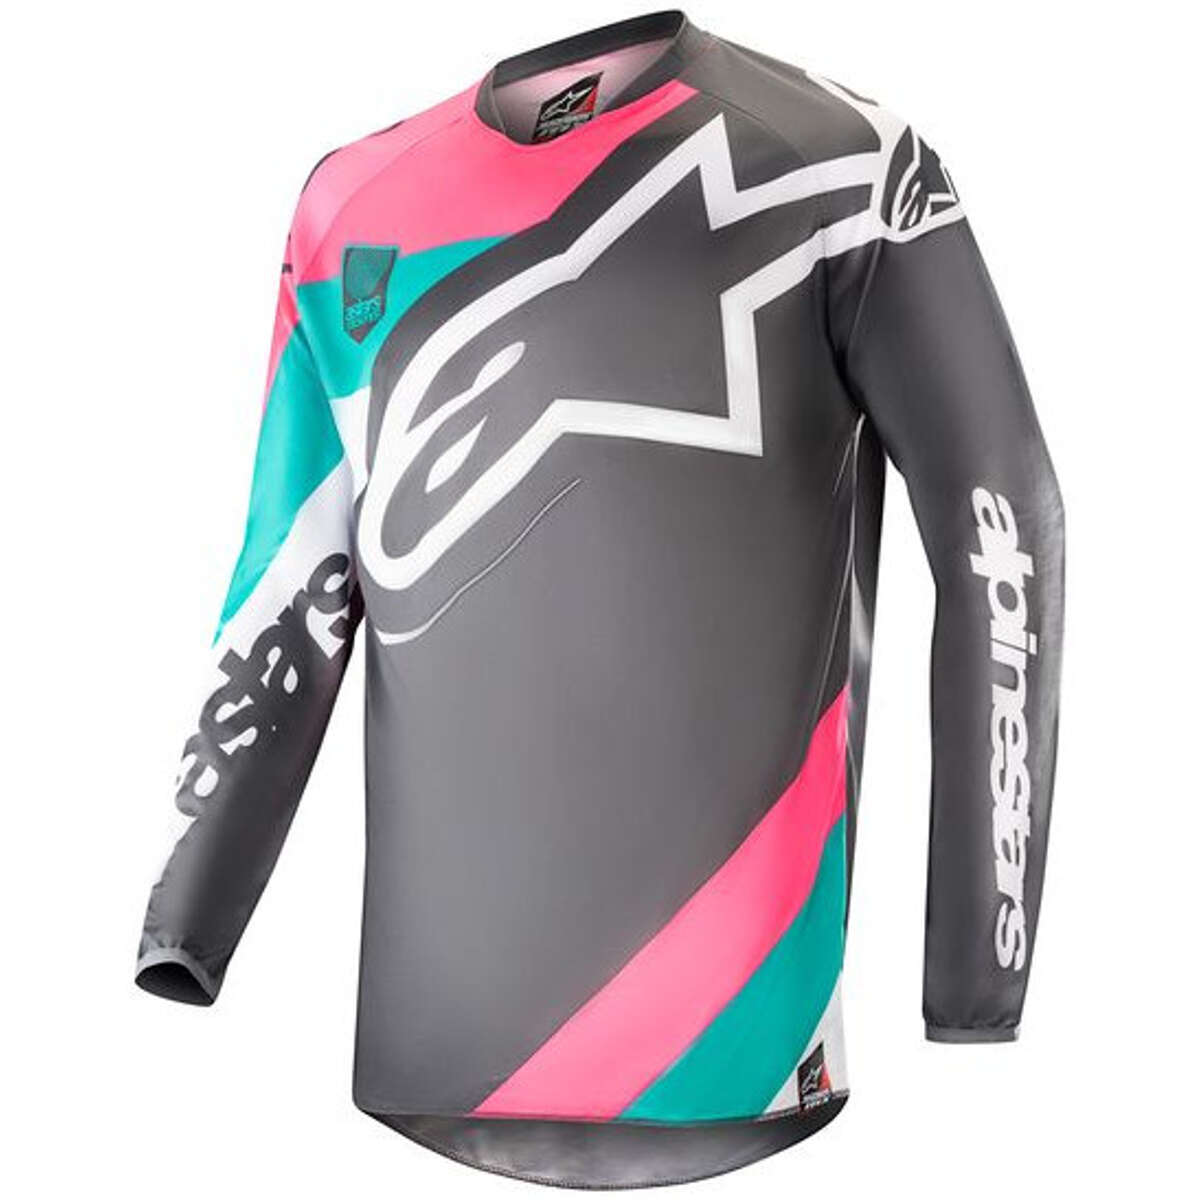 Alpinestars Jersey Racer Limited Edition Indy Vice - Grey/Pink/Turqouise